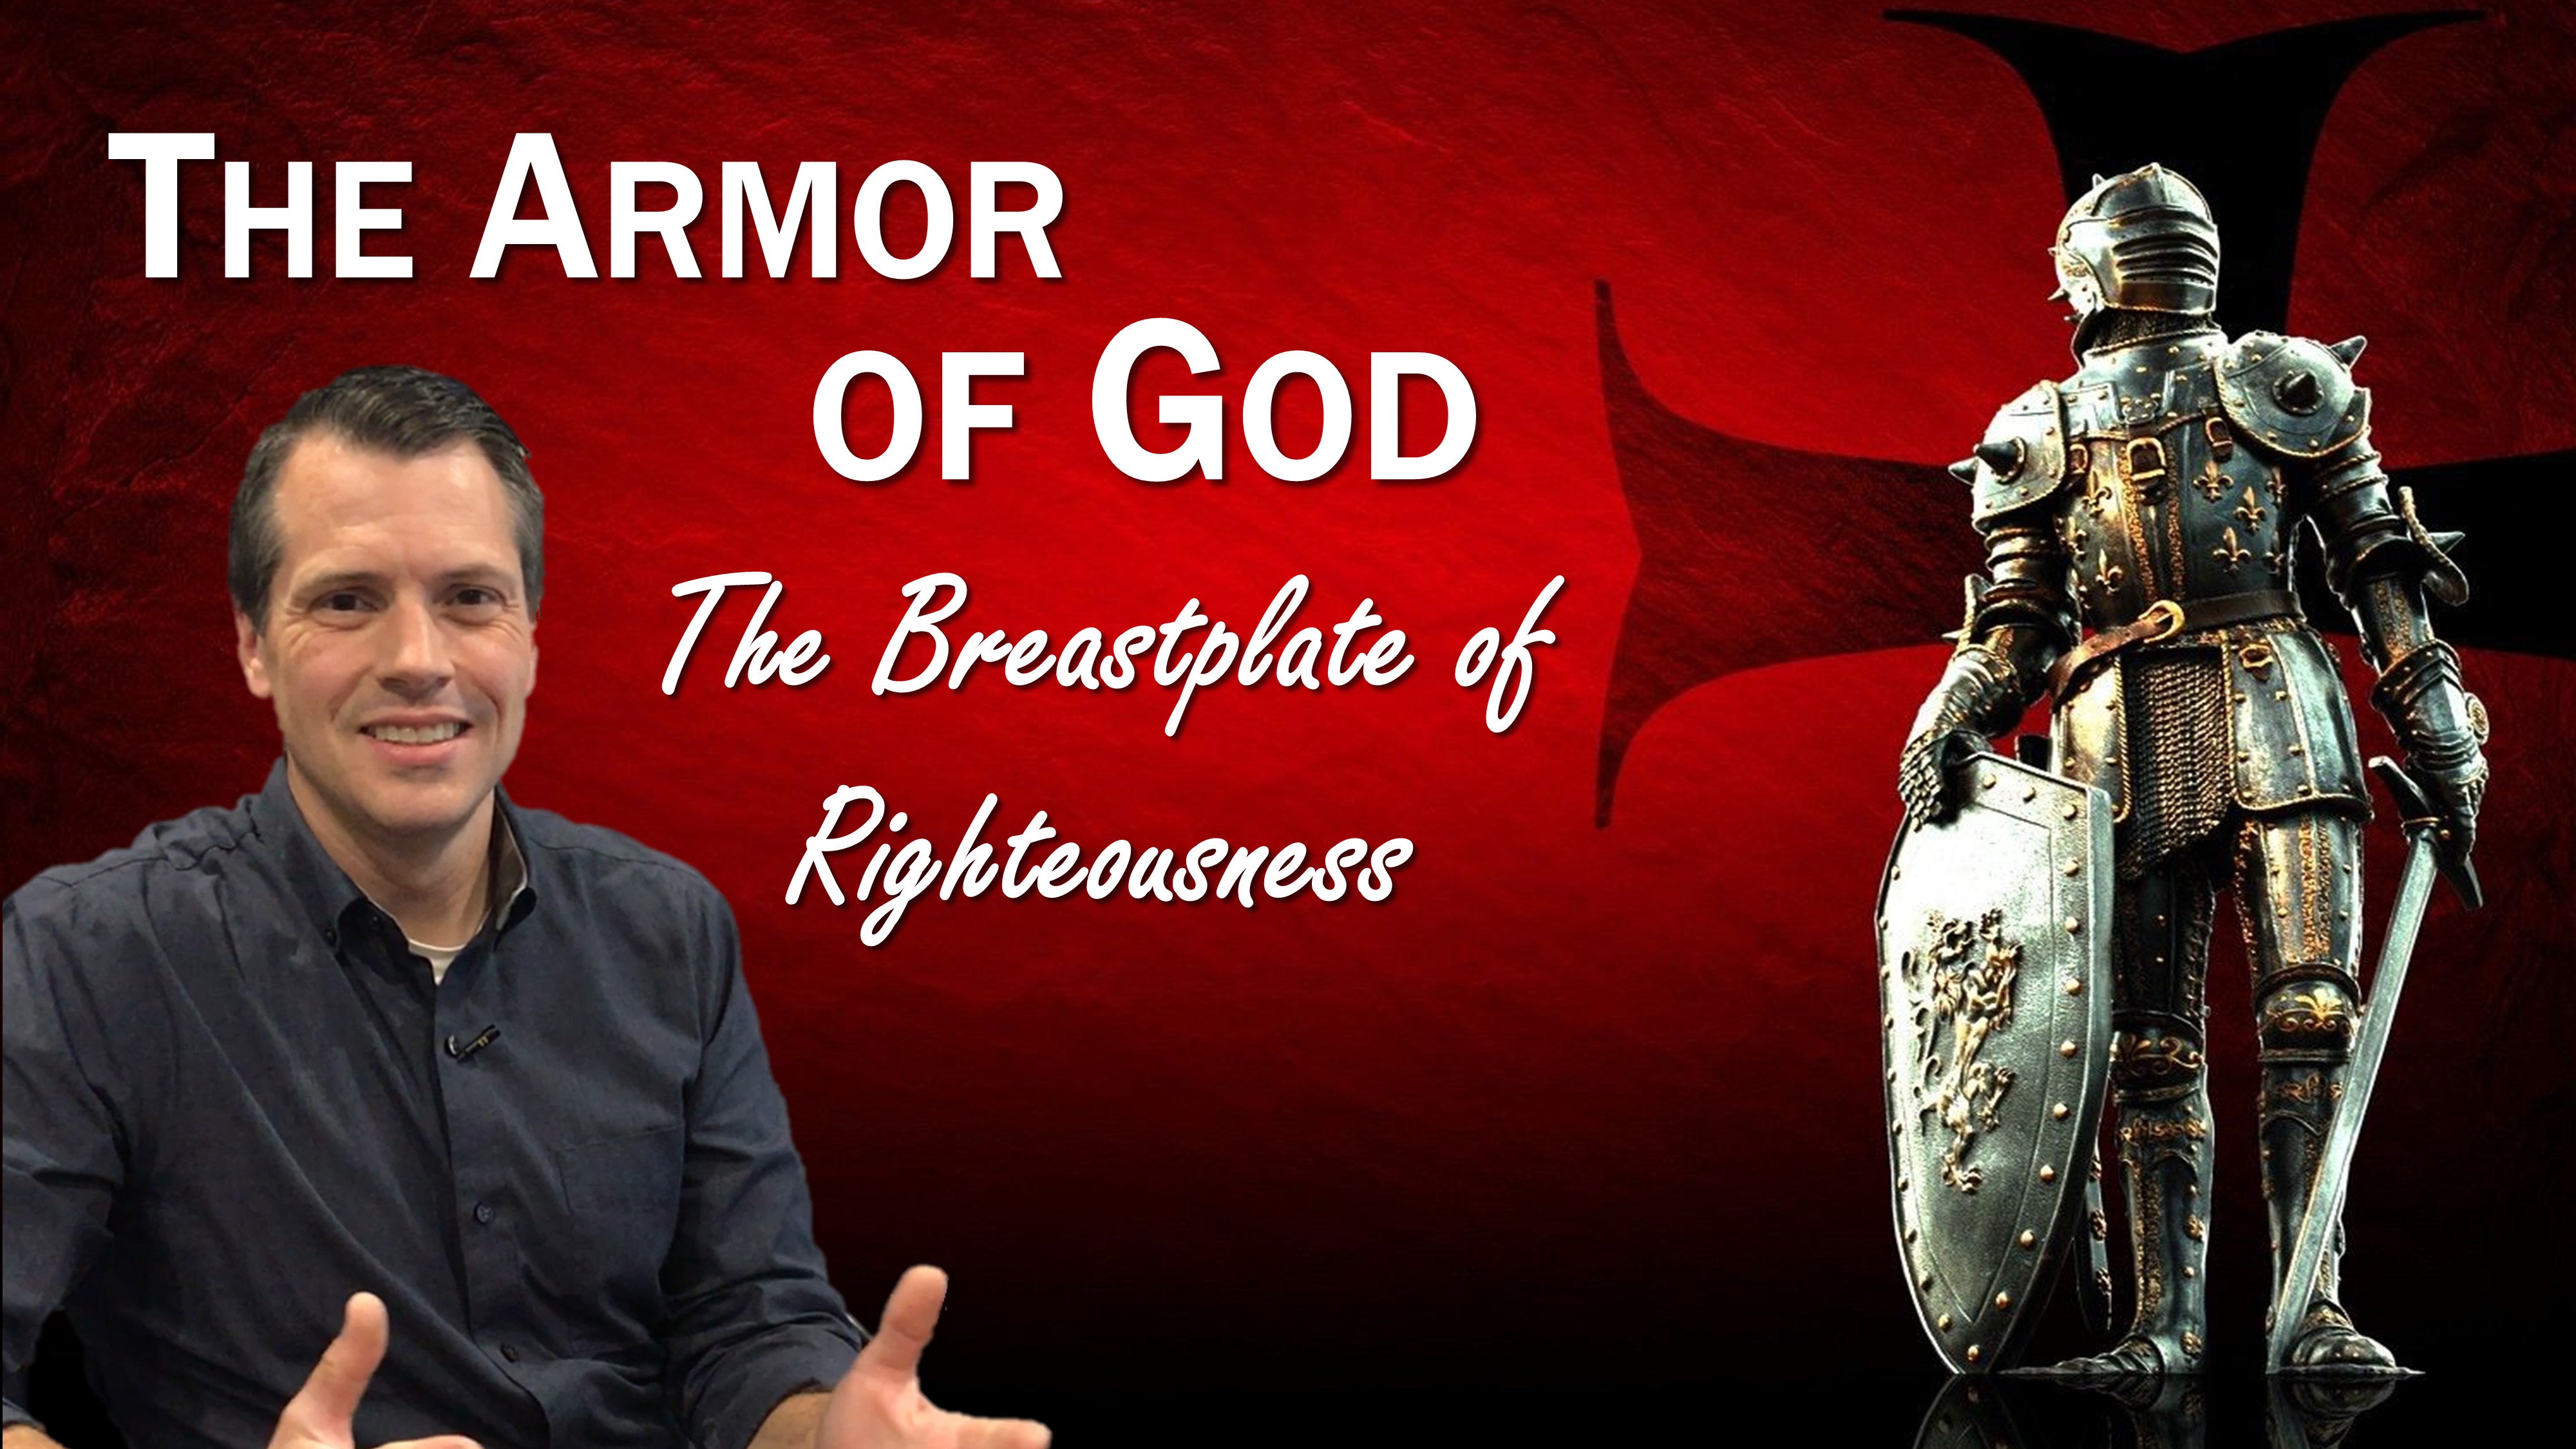 The Armor of God Part 3: The Breastplate of Righteousness